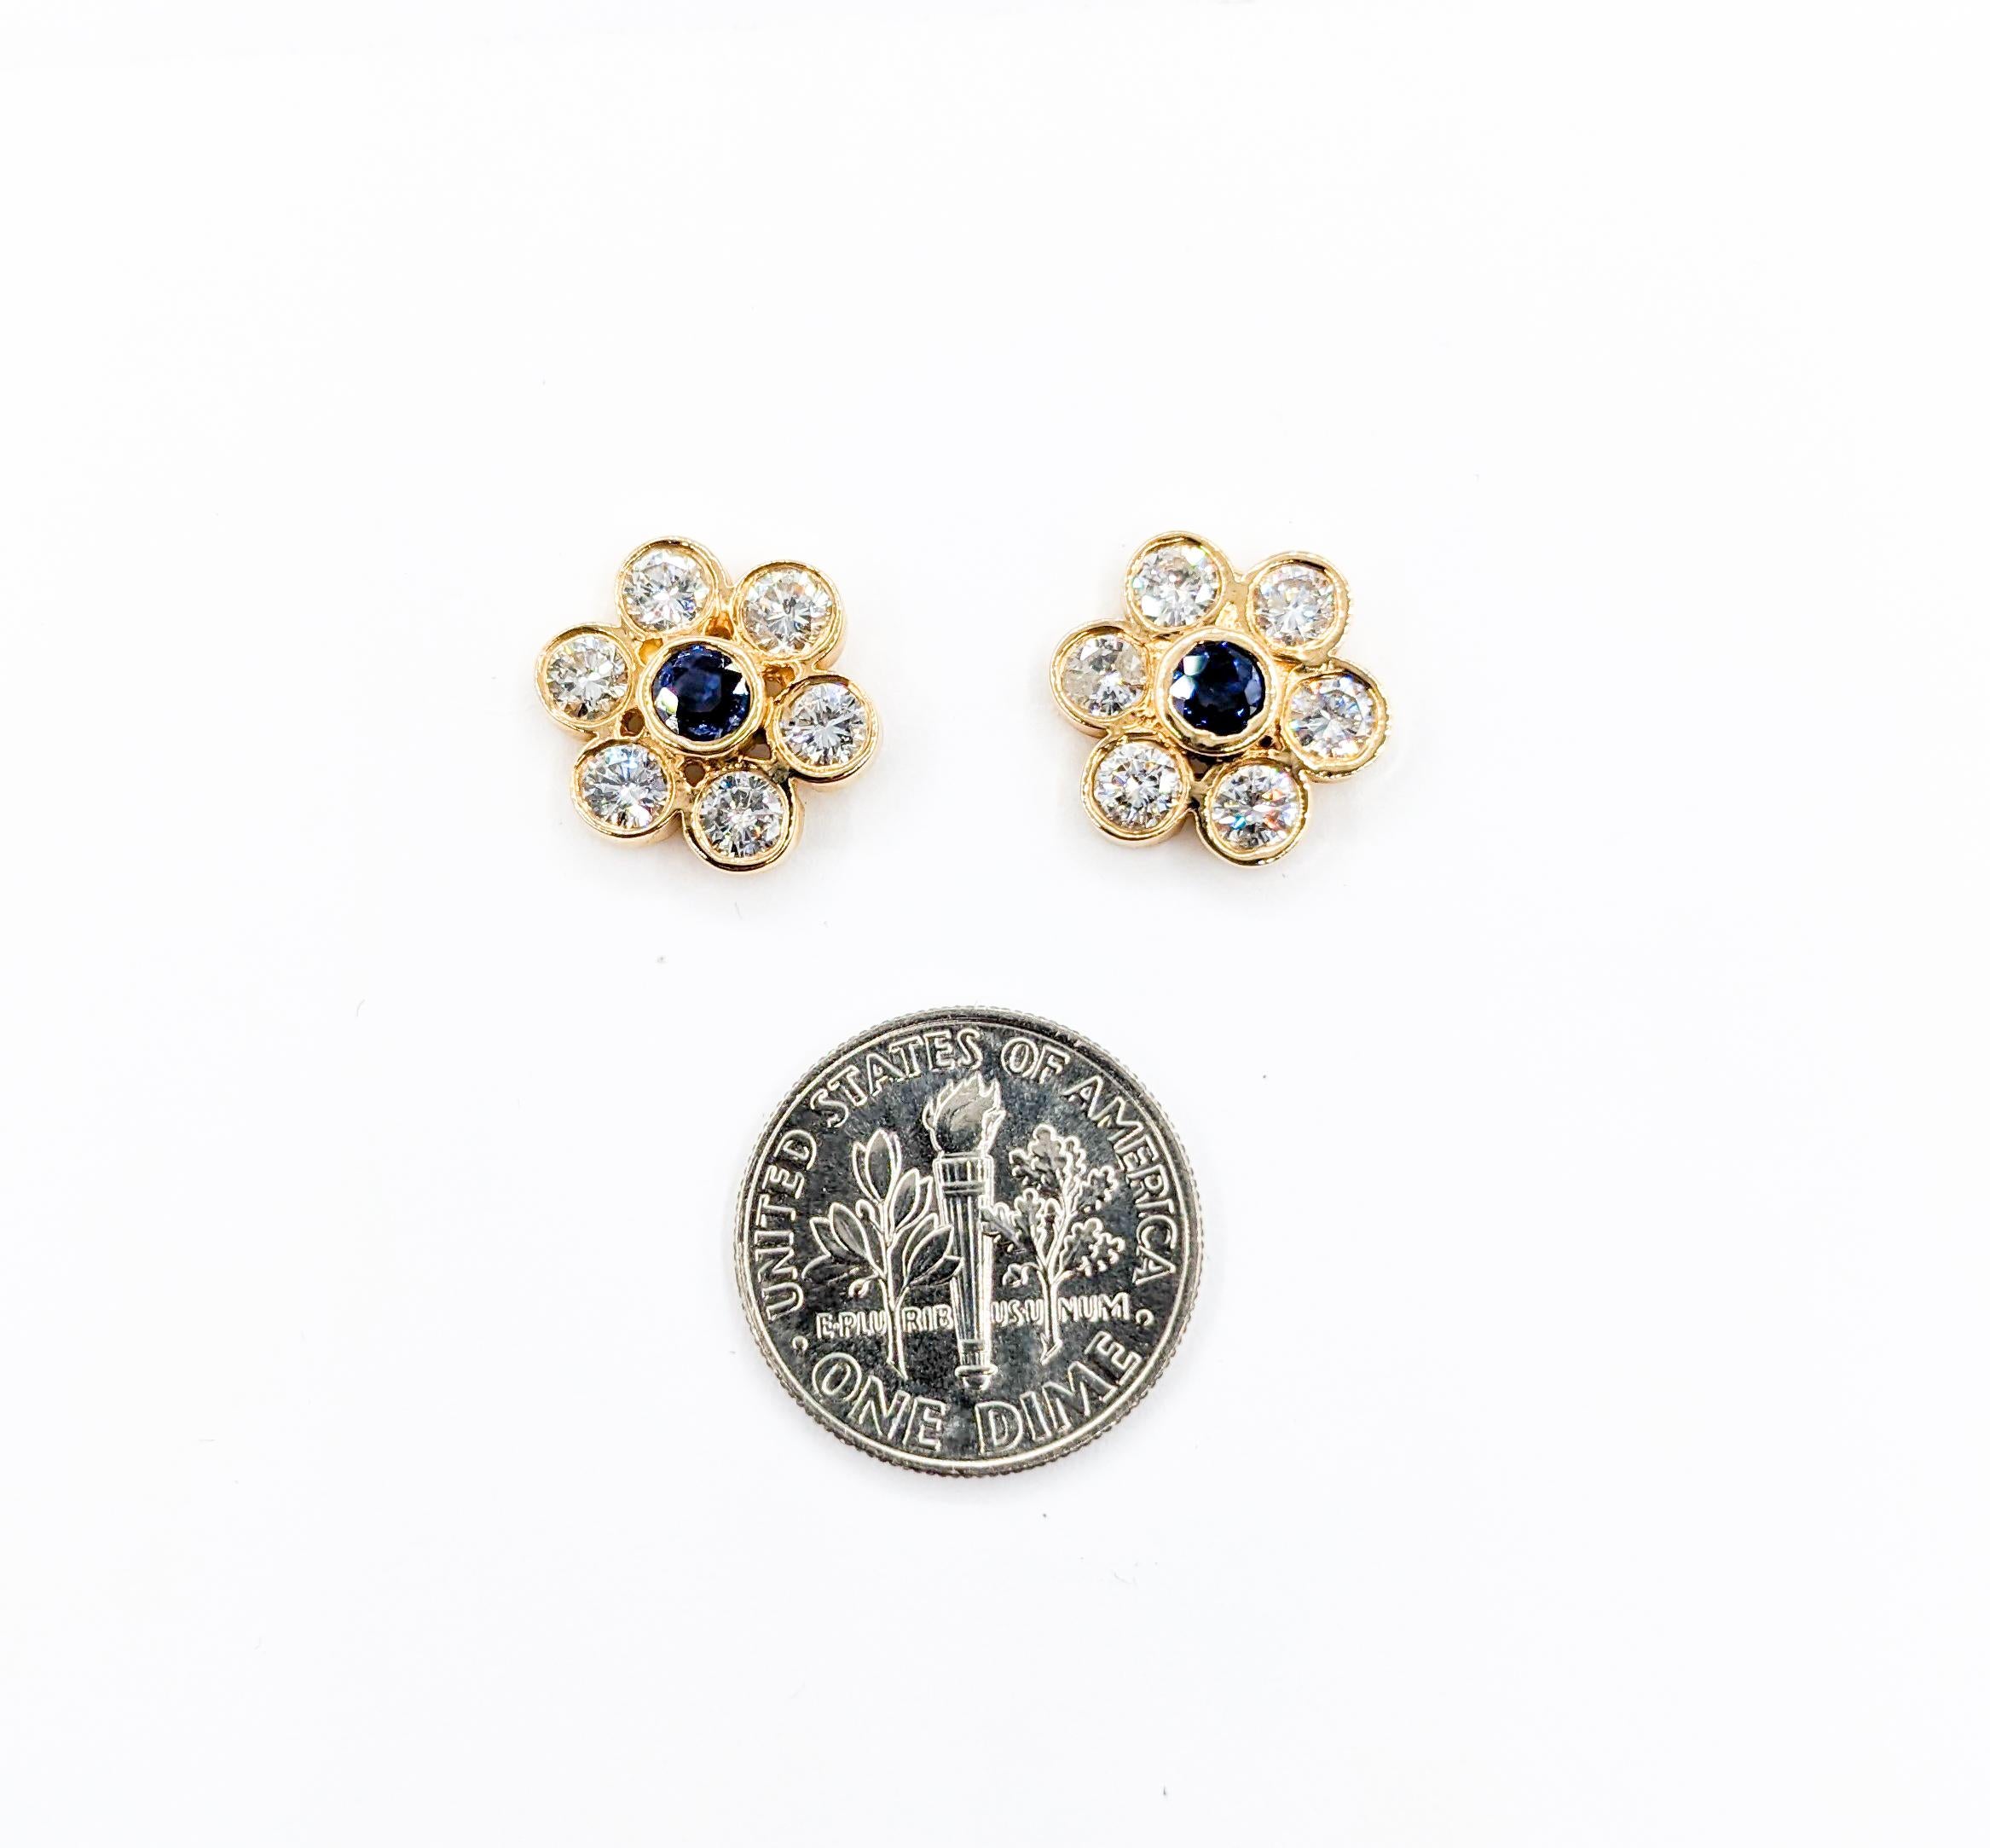 Retro Vintage Diamond & Sapphire Floral Stud Earrings in 14K Gold For Sale